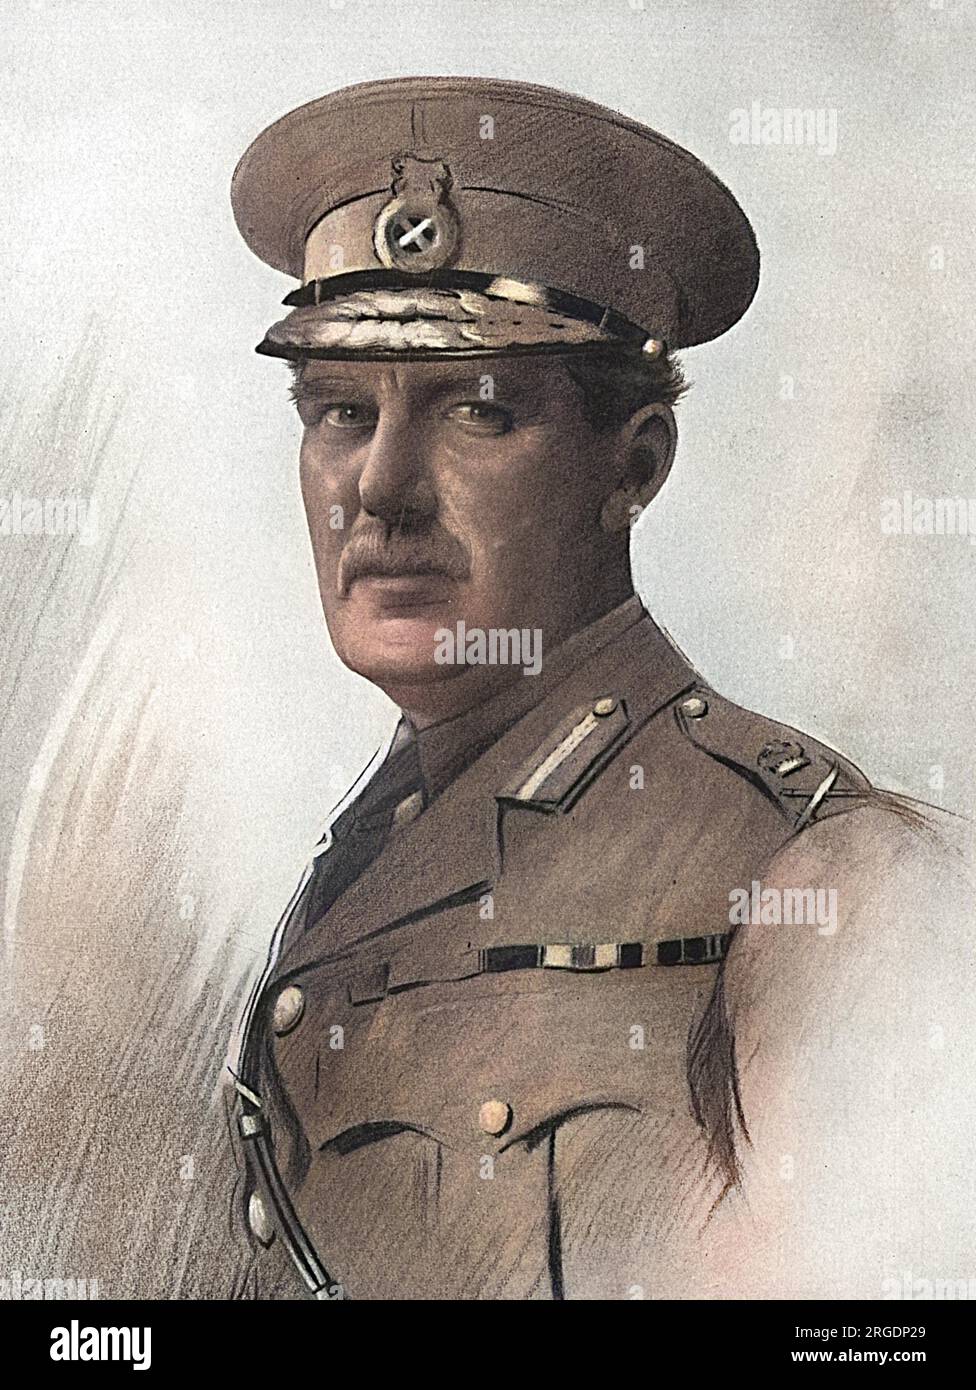 Lieutenant-General Sir John Steven Cowans, KCB, MVO (1862 - 1921), Quartermaster-General adn member of the Army Council during the Great War in a pencil portrait by Lieutenant Percival Anderson. Stock Photo